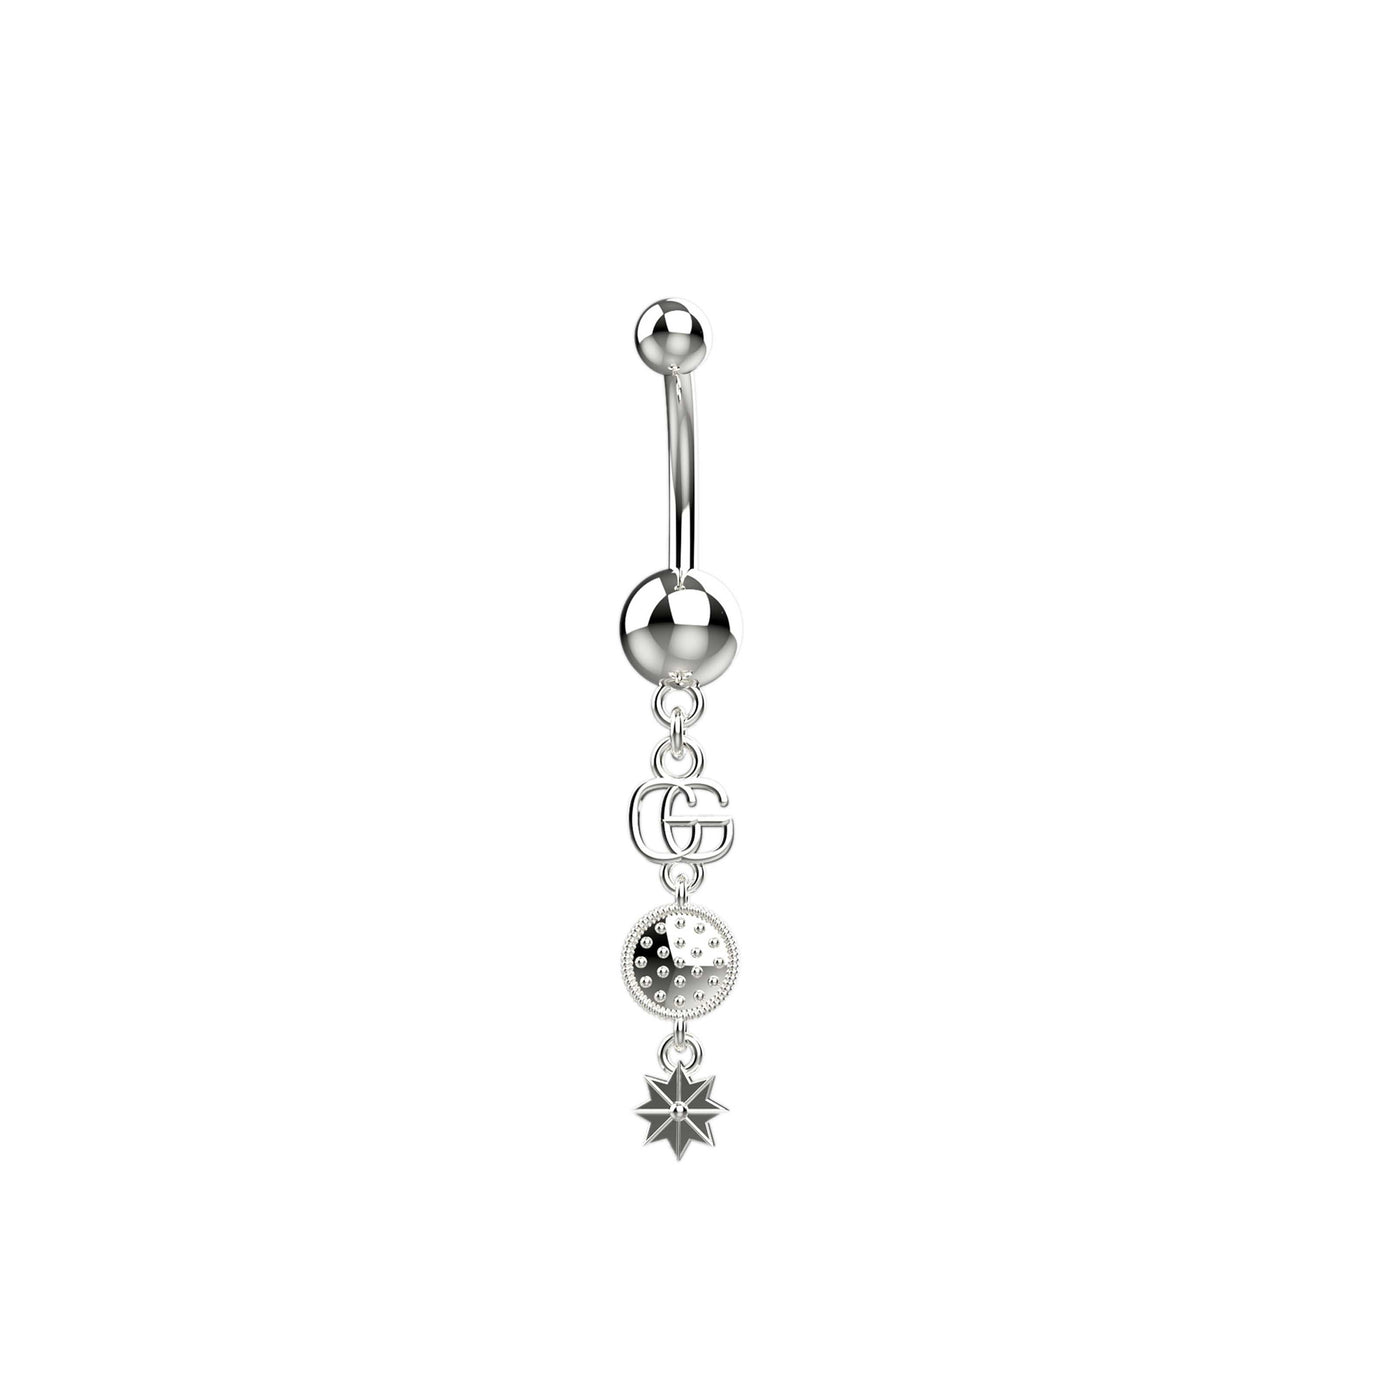 Gucci Styled Dangling Belly Bar